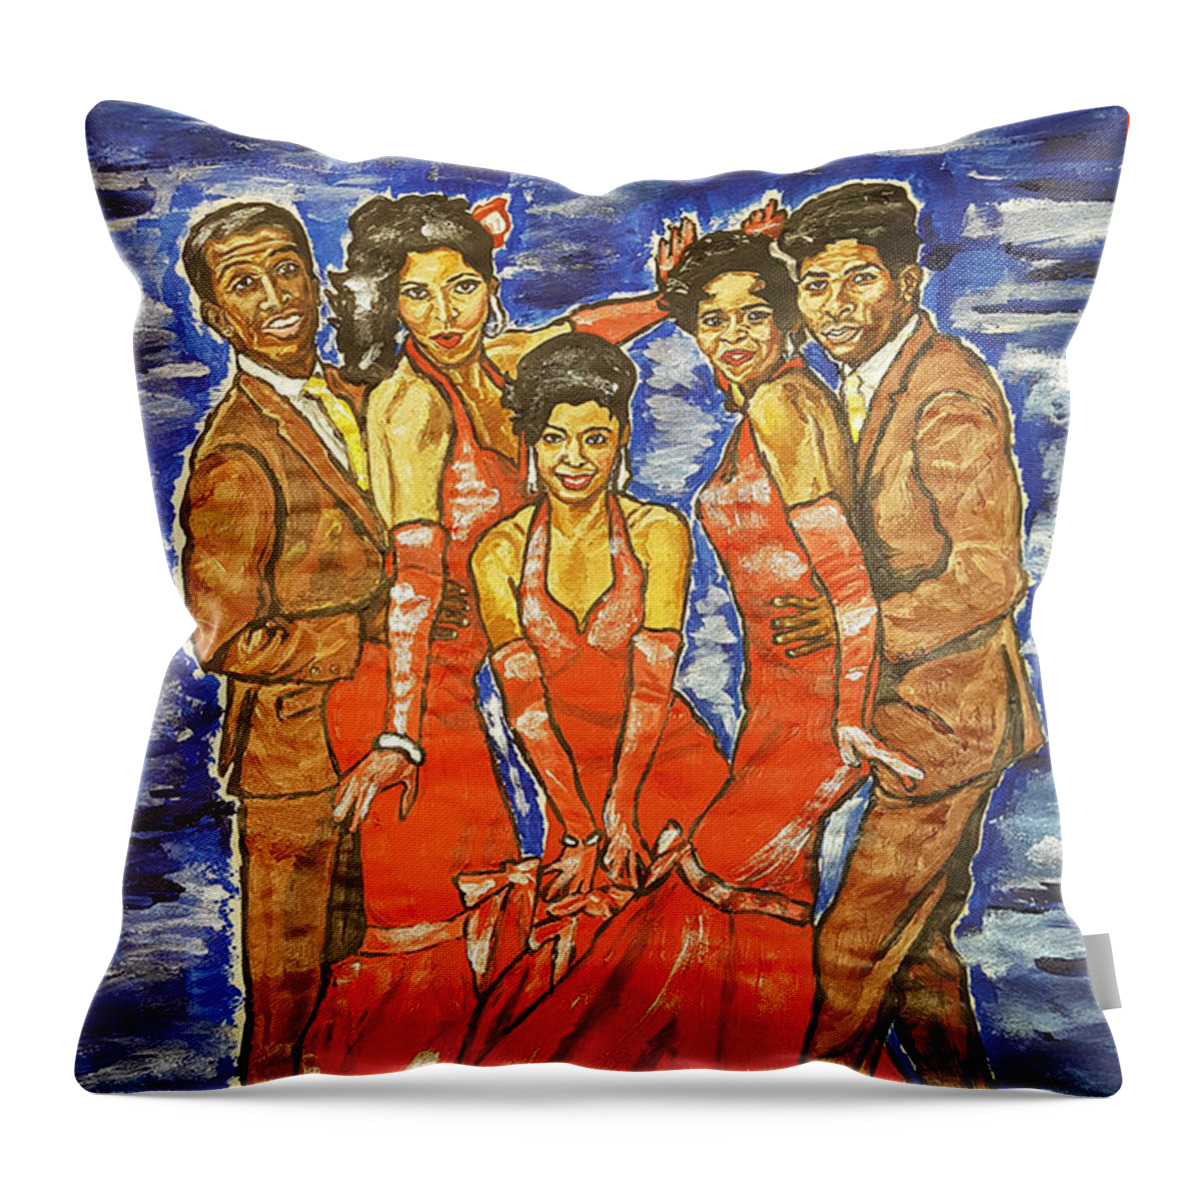 Sparkle Throw Pillow featuring the painting Sparkle by Rachel Natalie Rawlins